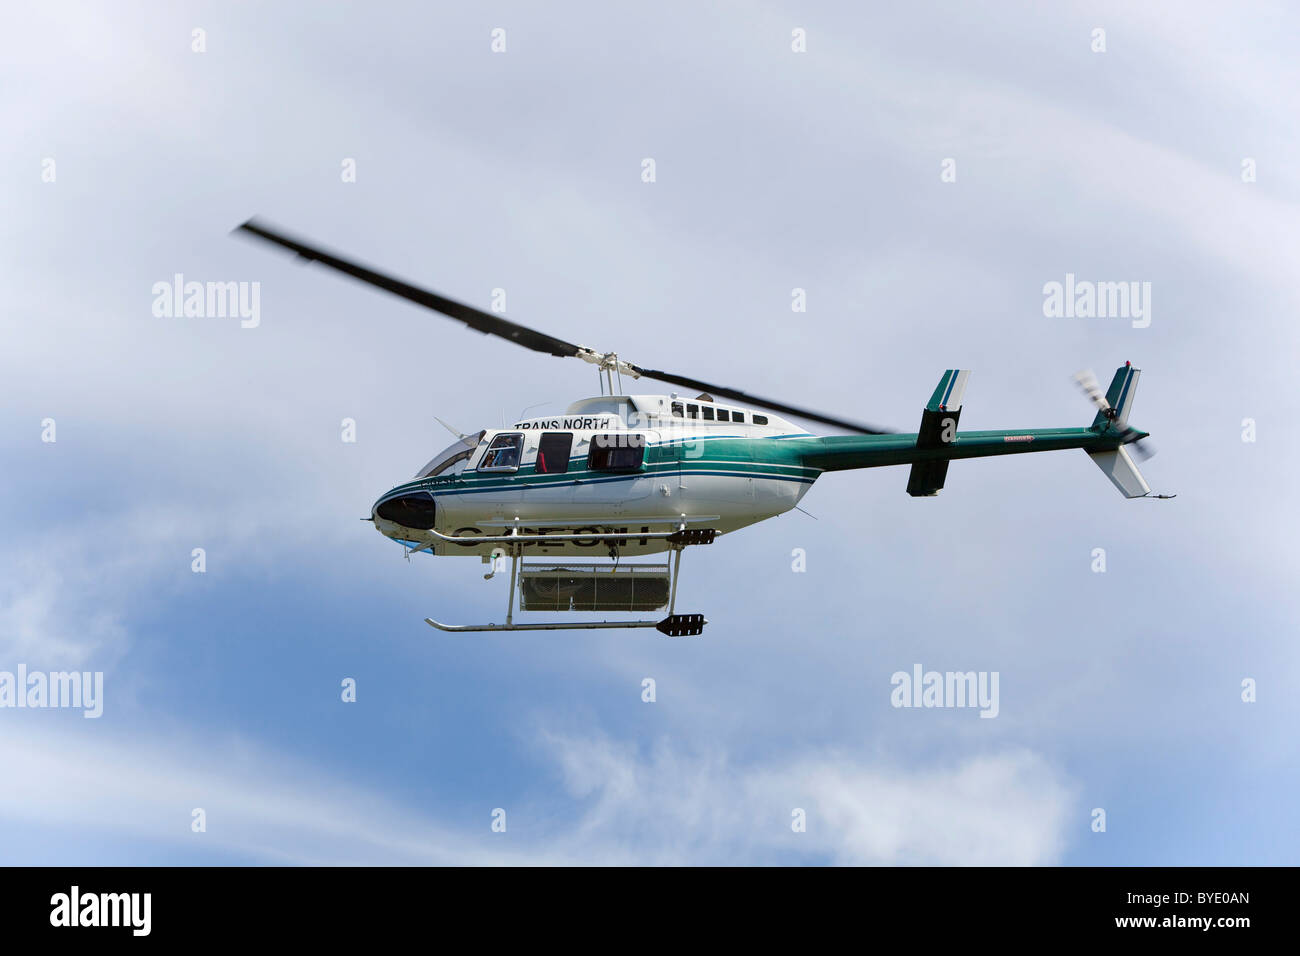 Helicopter Bell 206L4 Long Ranger in flight, operated by Trans North, Yukon Territory, Canada Stock Photo